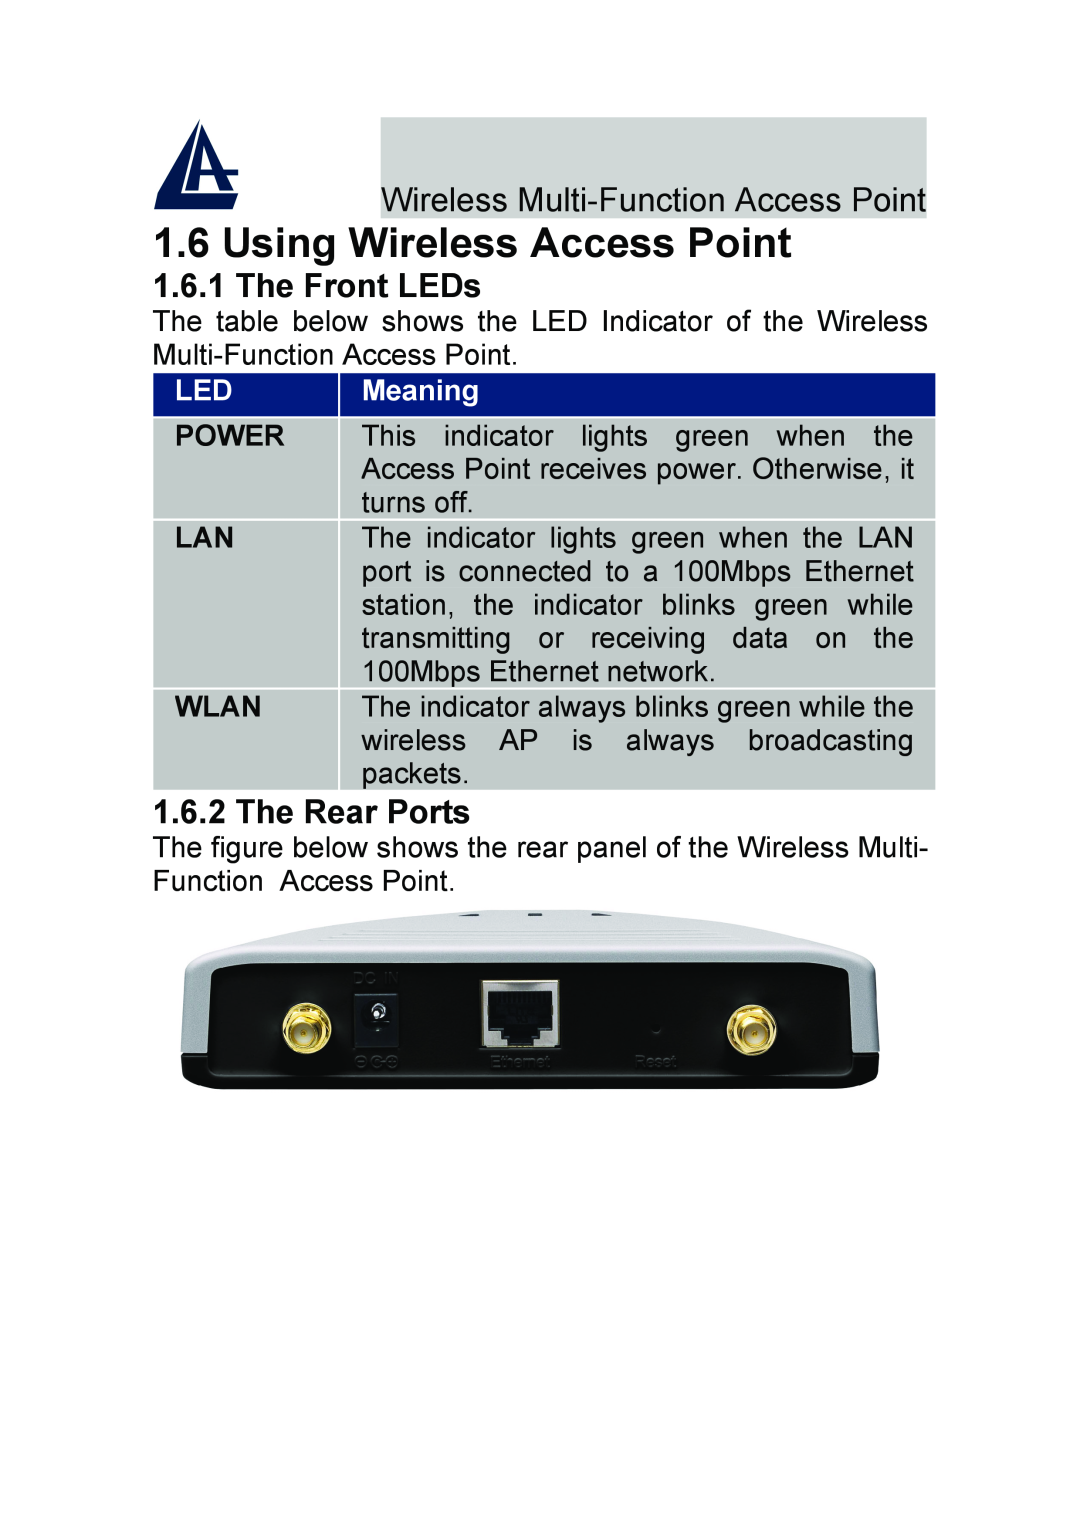 Atlantis Land A02-AP-W54_GE01 quick start Using Wireless Access Point, The Front LEDs, The Rear Ports, LED Meaning 